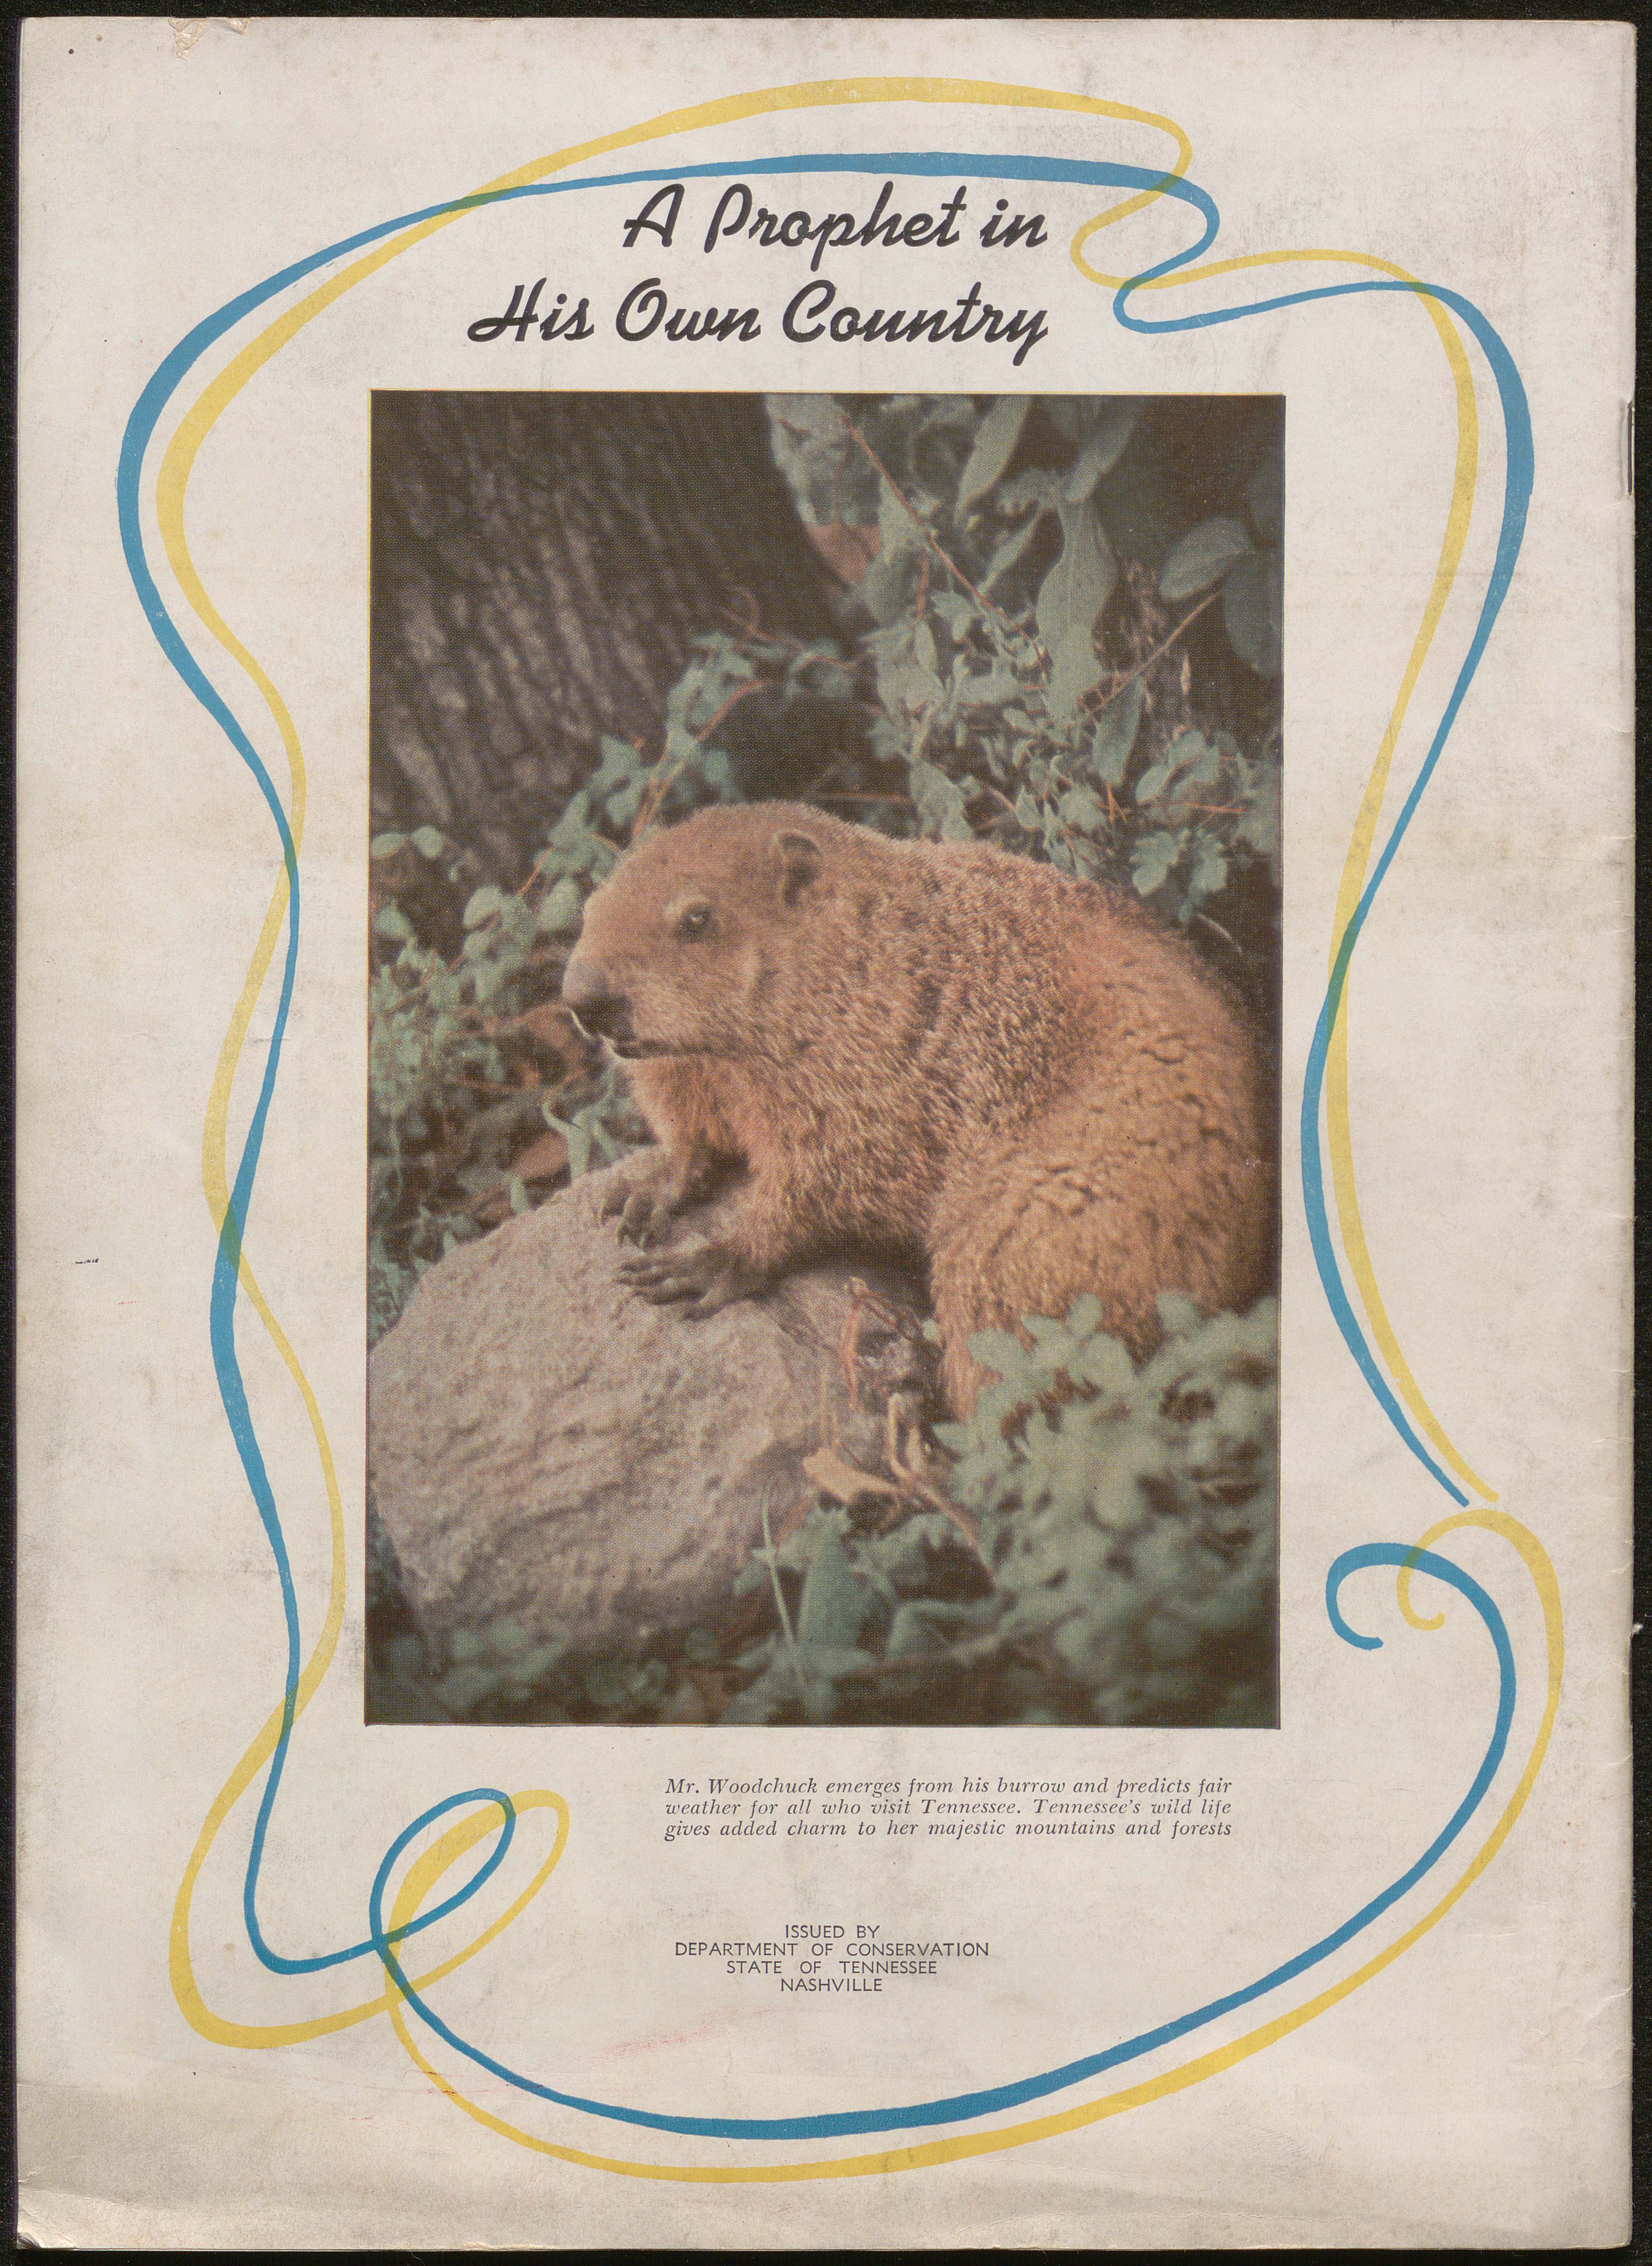 Photograph of a groundhog on the back of a pamphlet. Text reads "A Prophet in His Own Country".